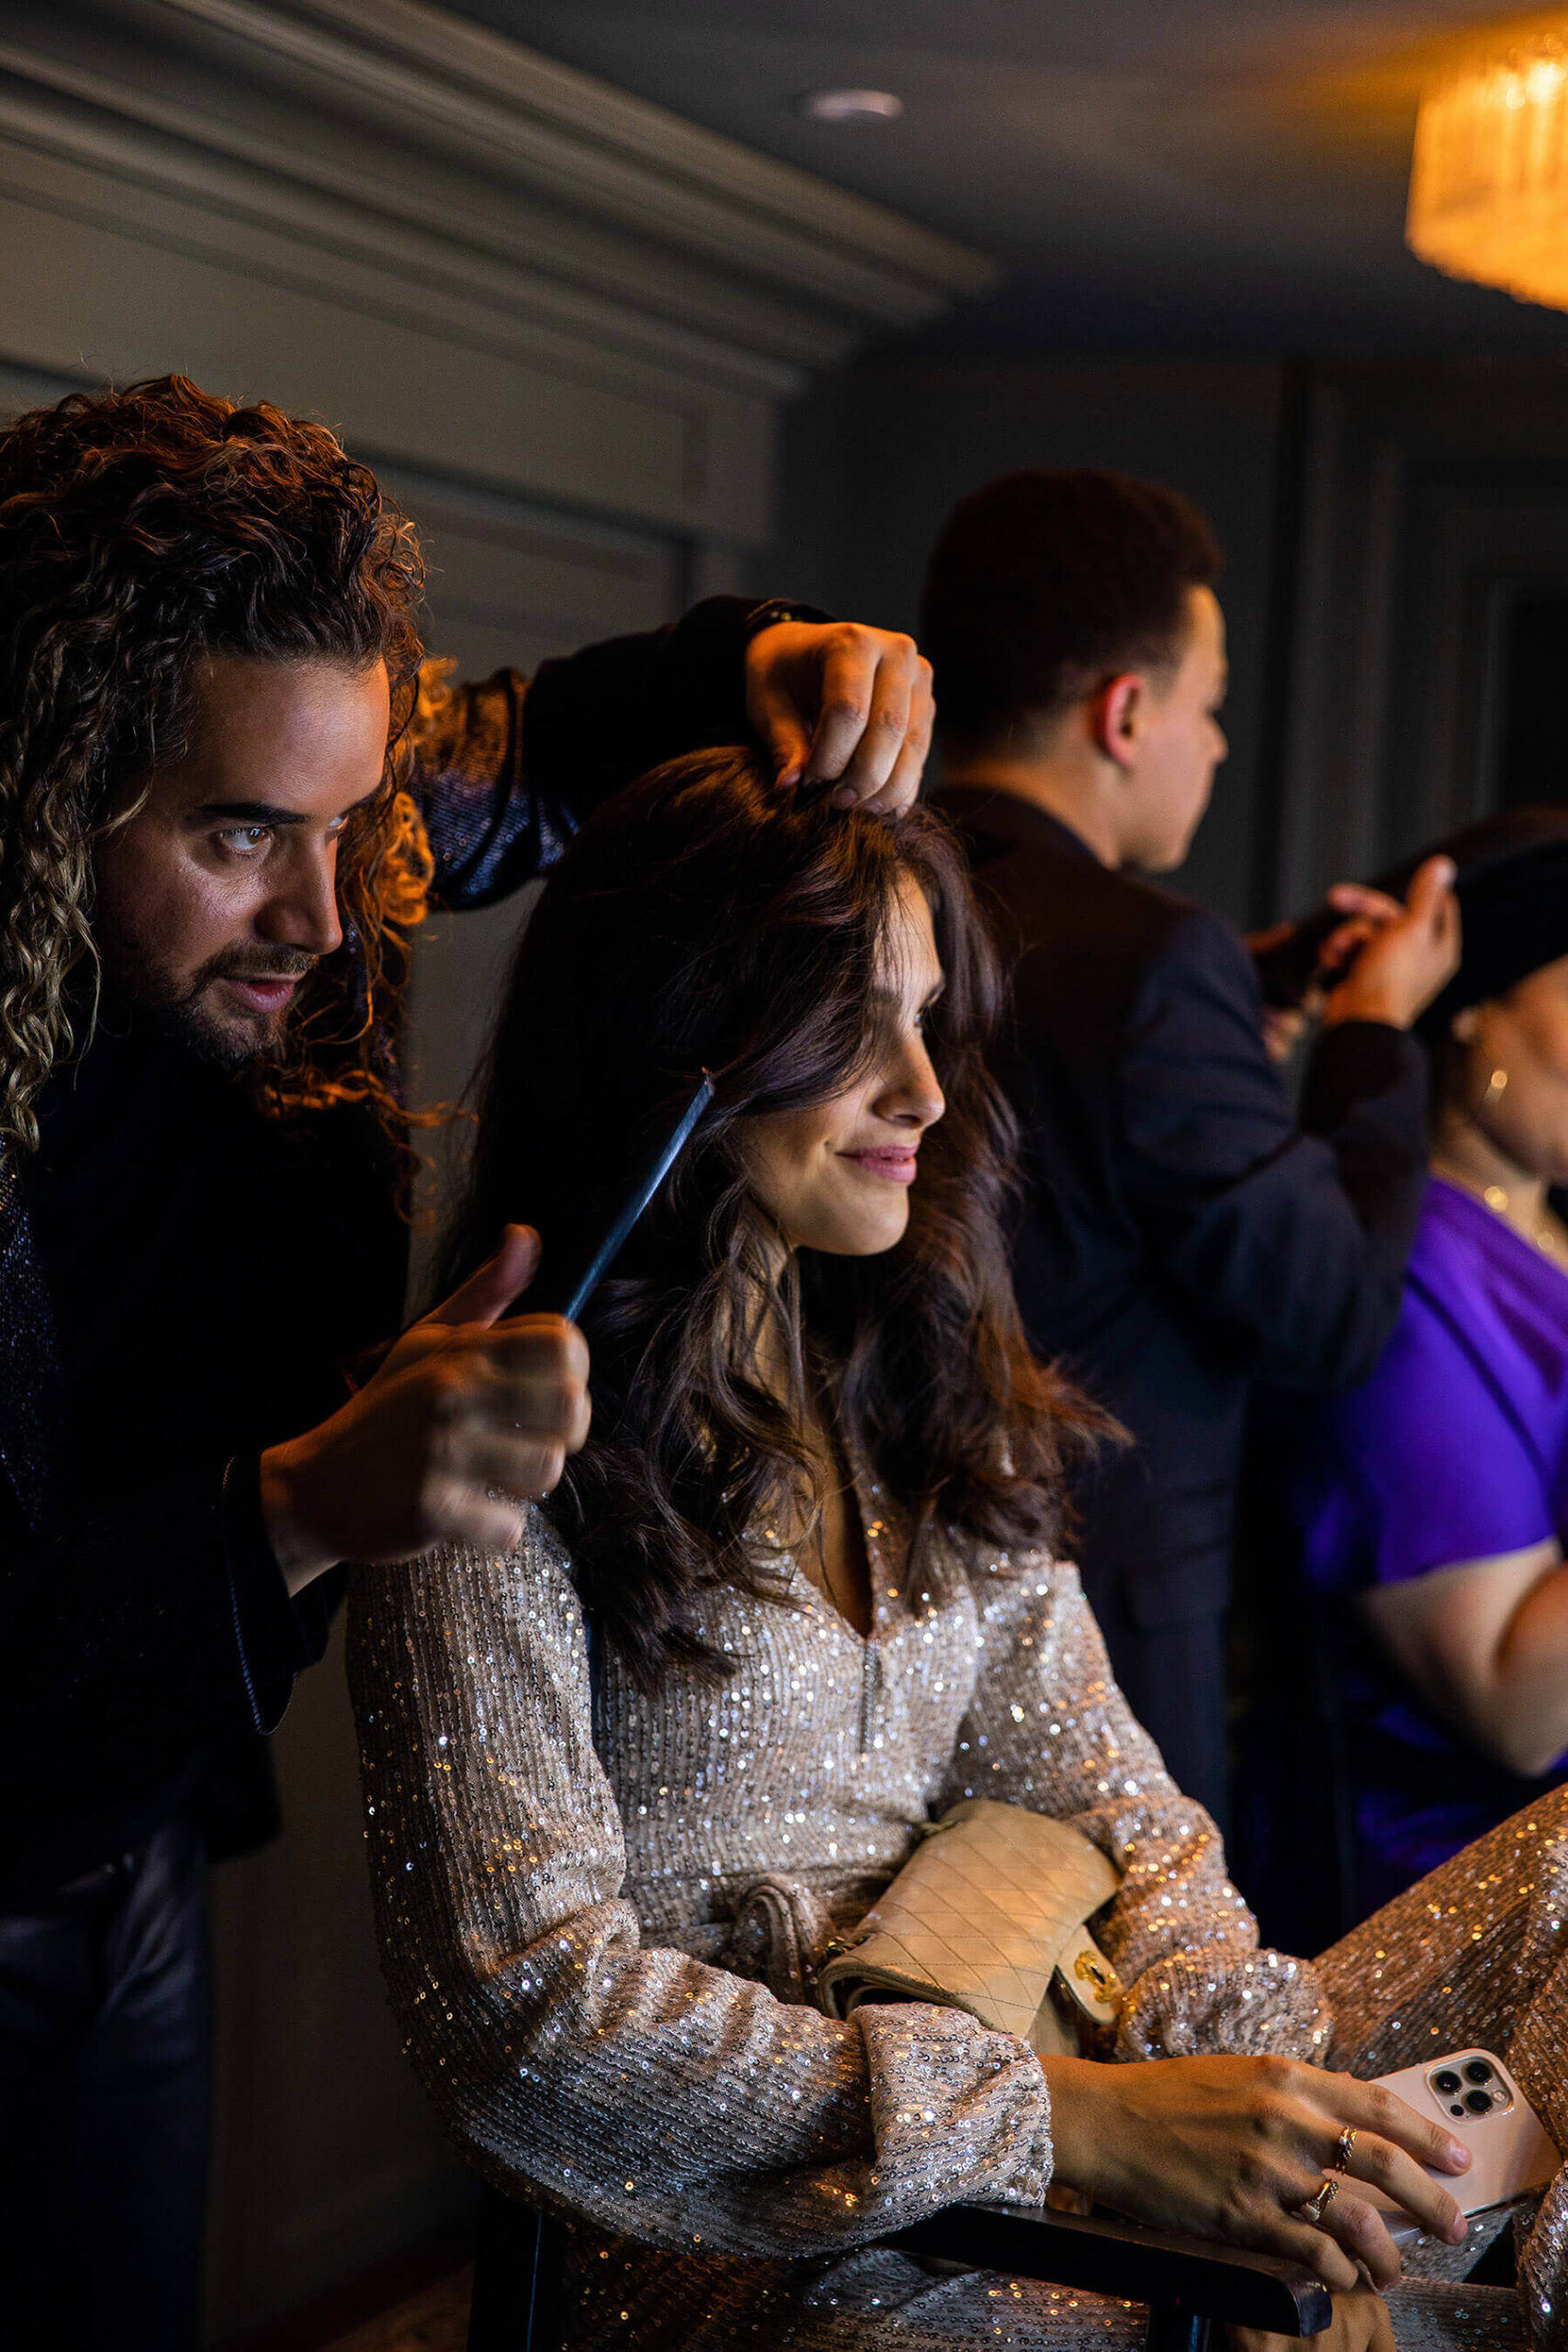 ghd Engaging Influencer Campaign beauty and hair brand